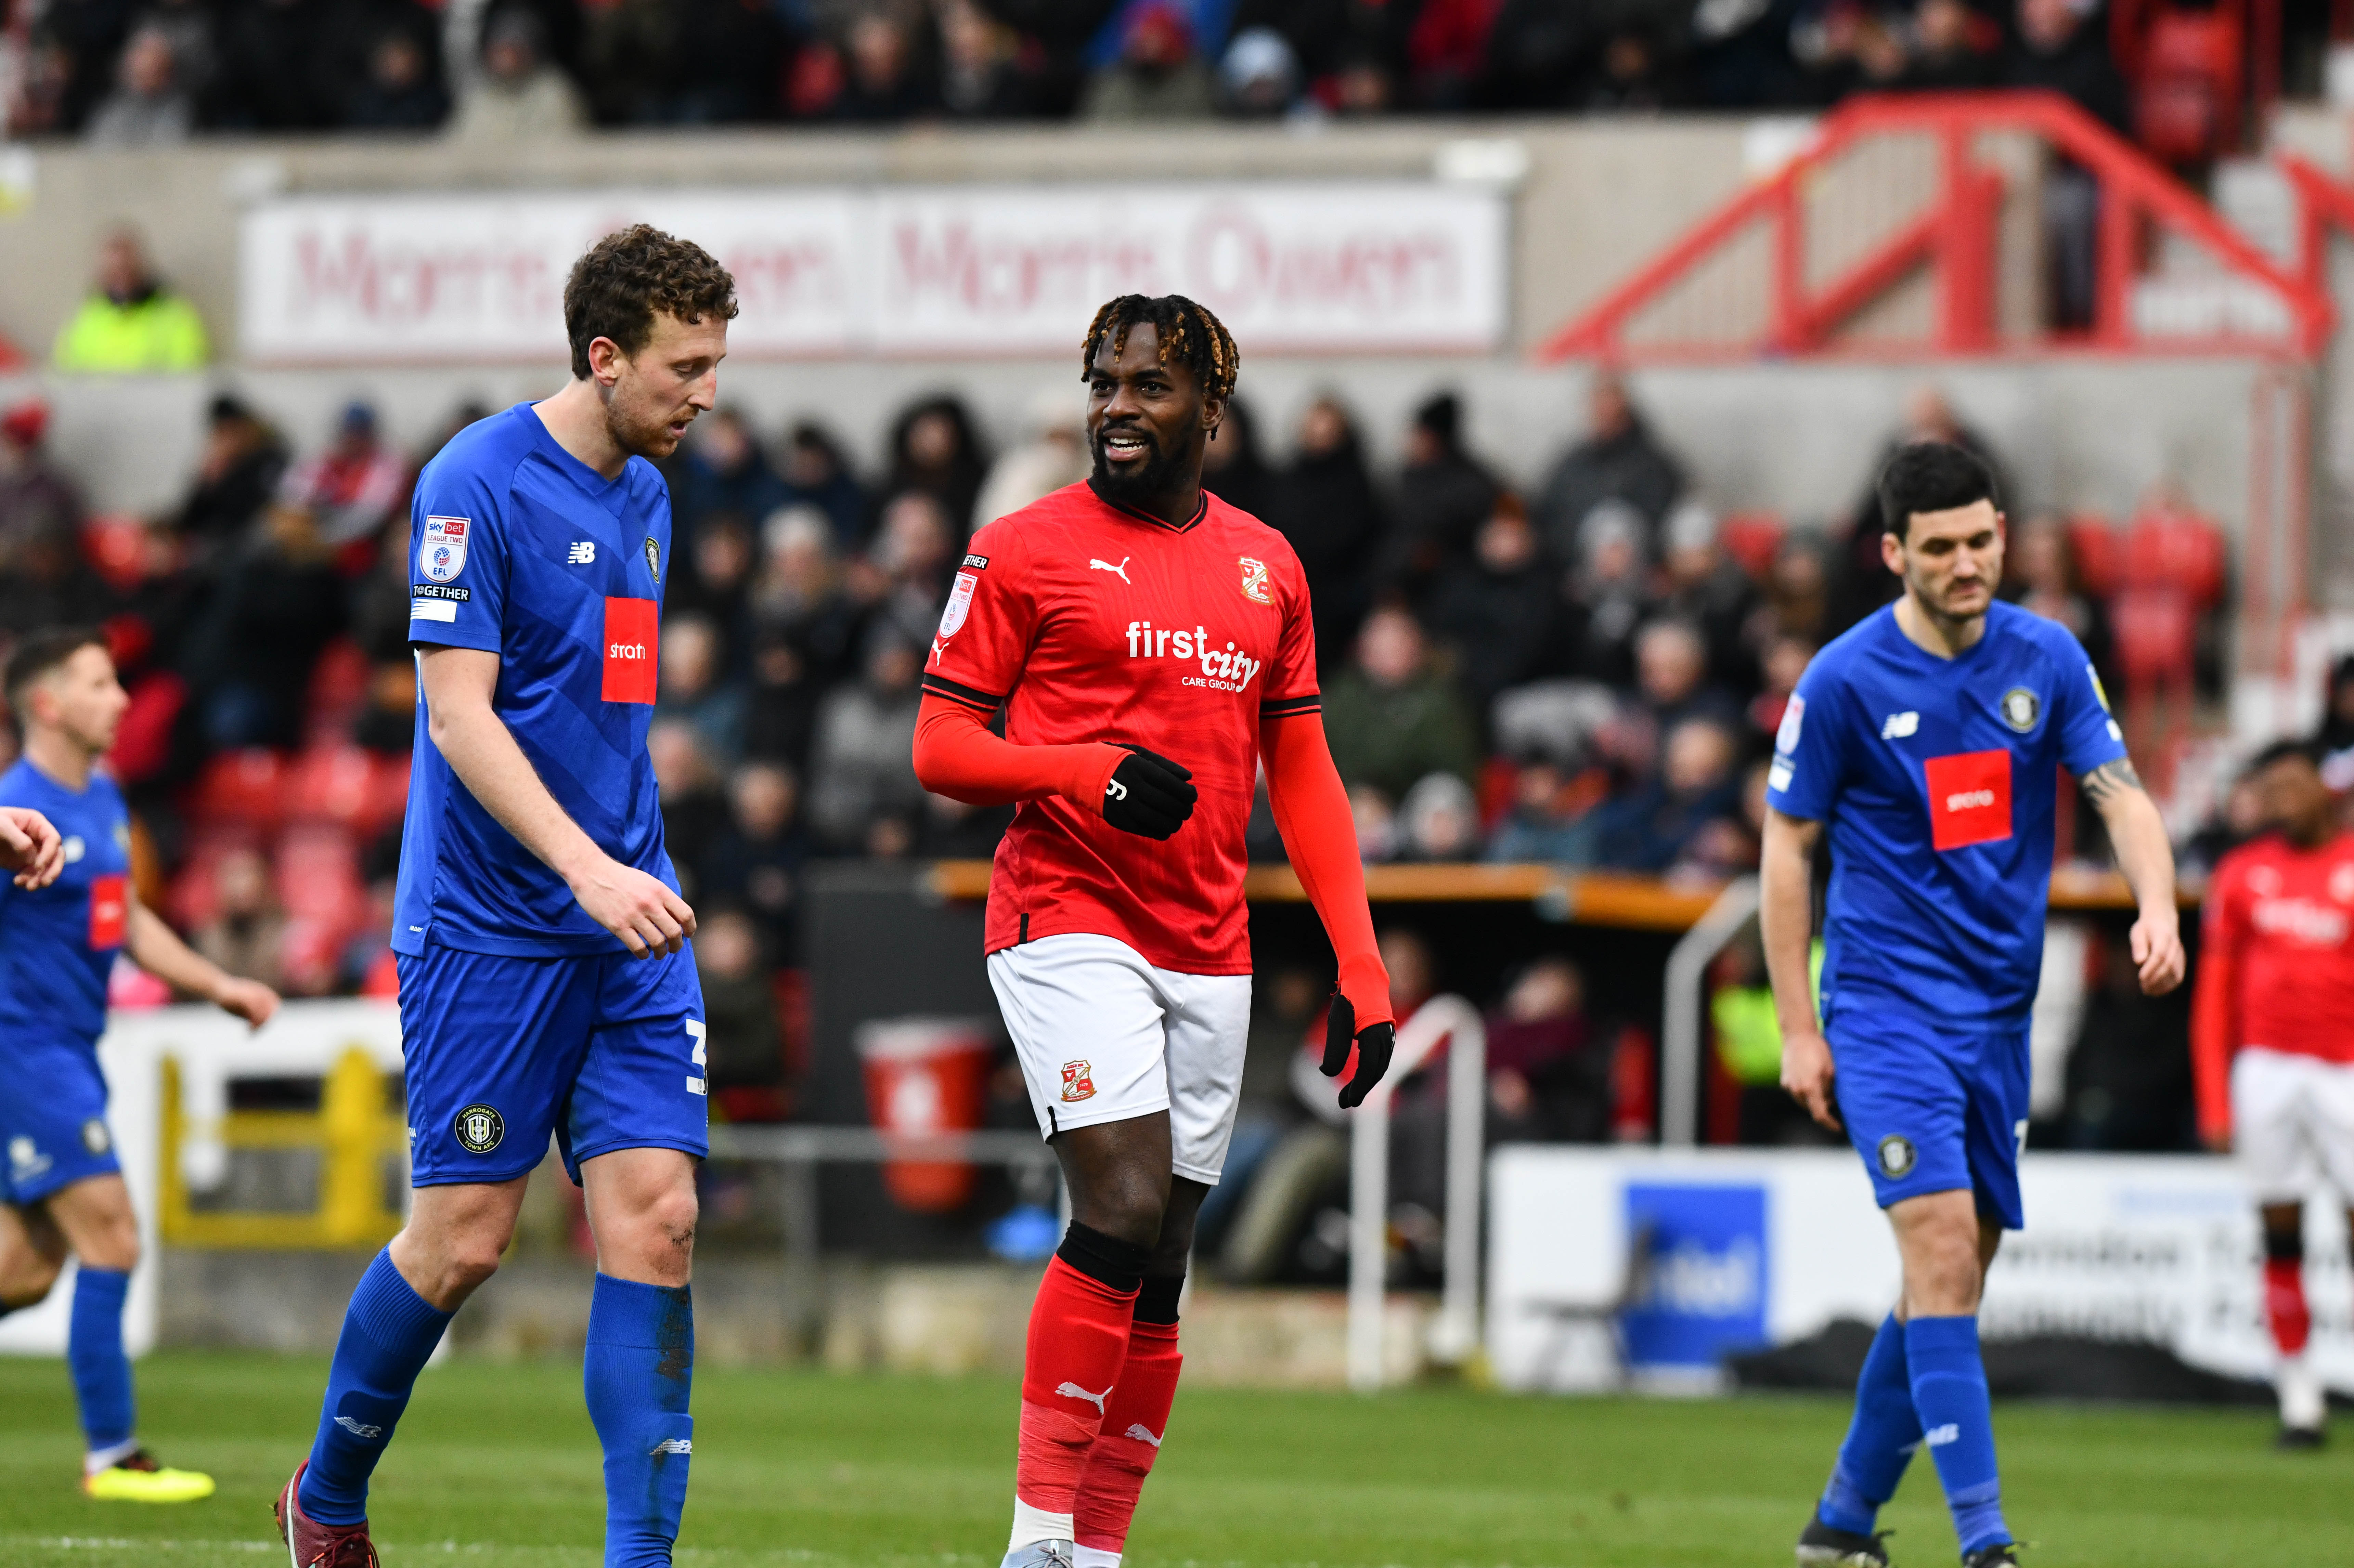 Tomi Adeloye isn't showing the desire to play for Swindon Town, according to Jody Morris